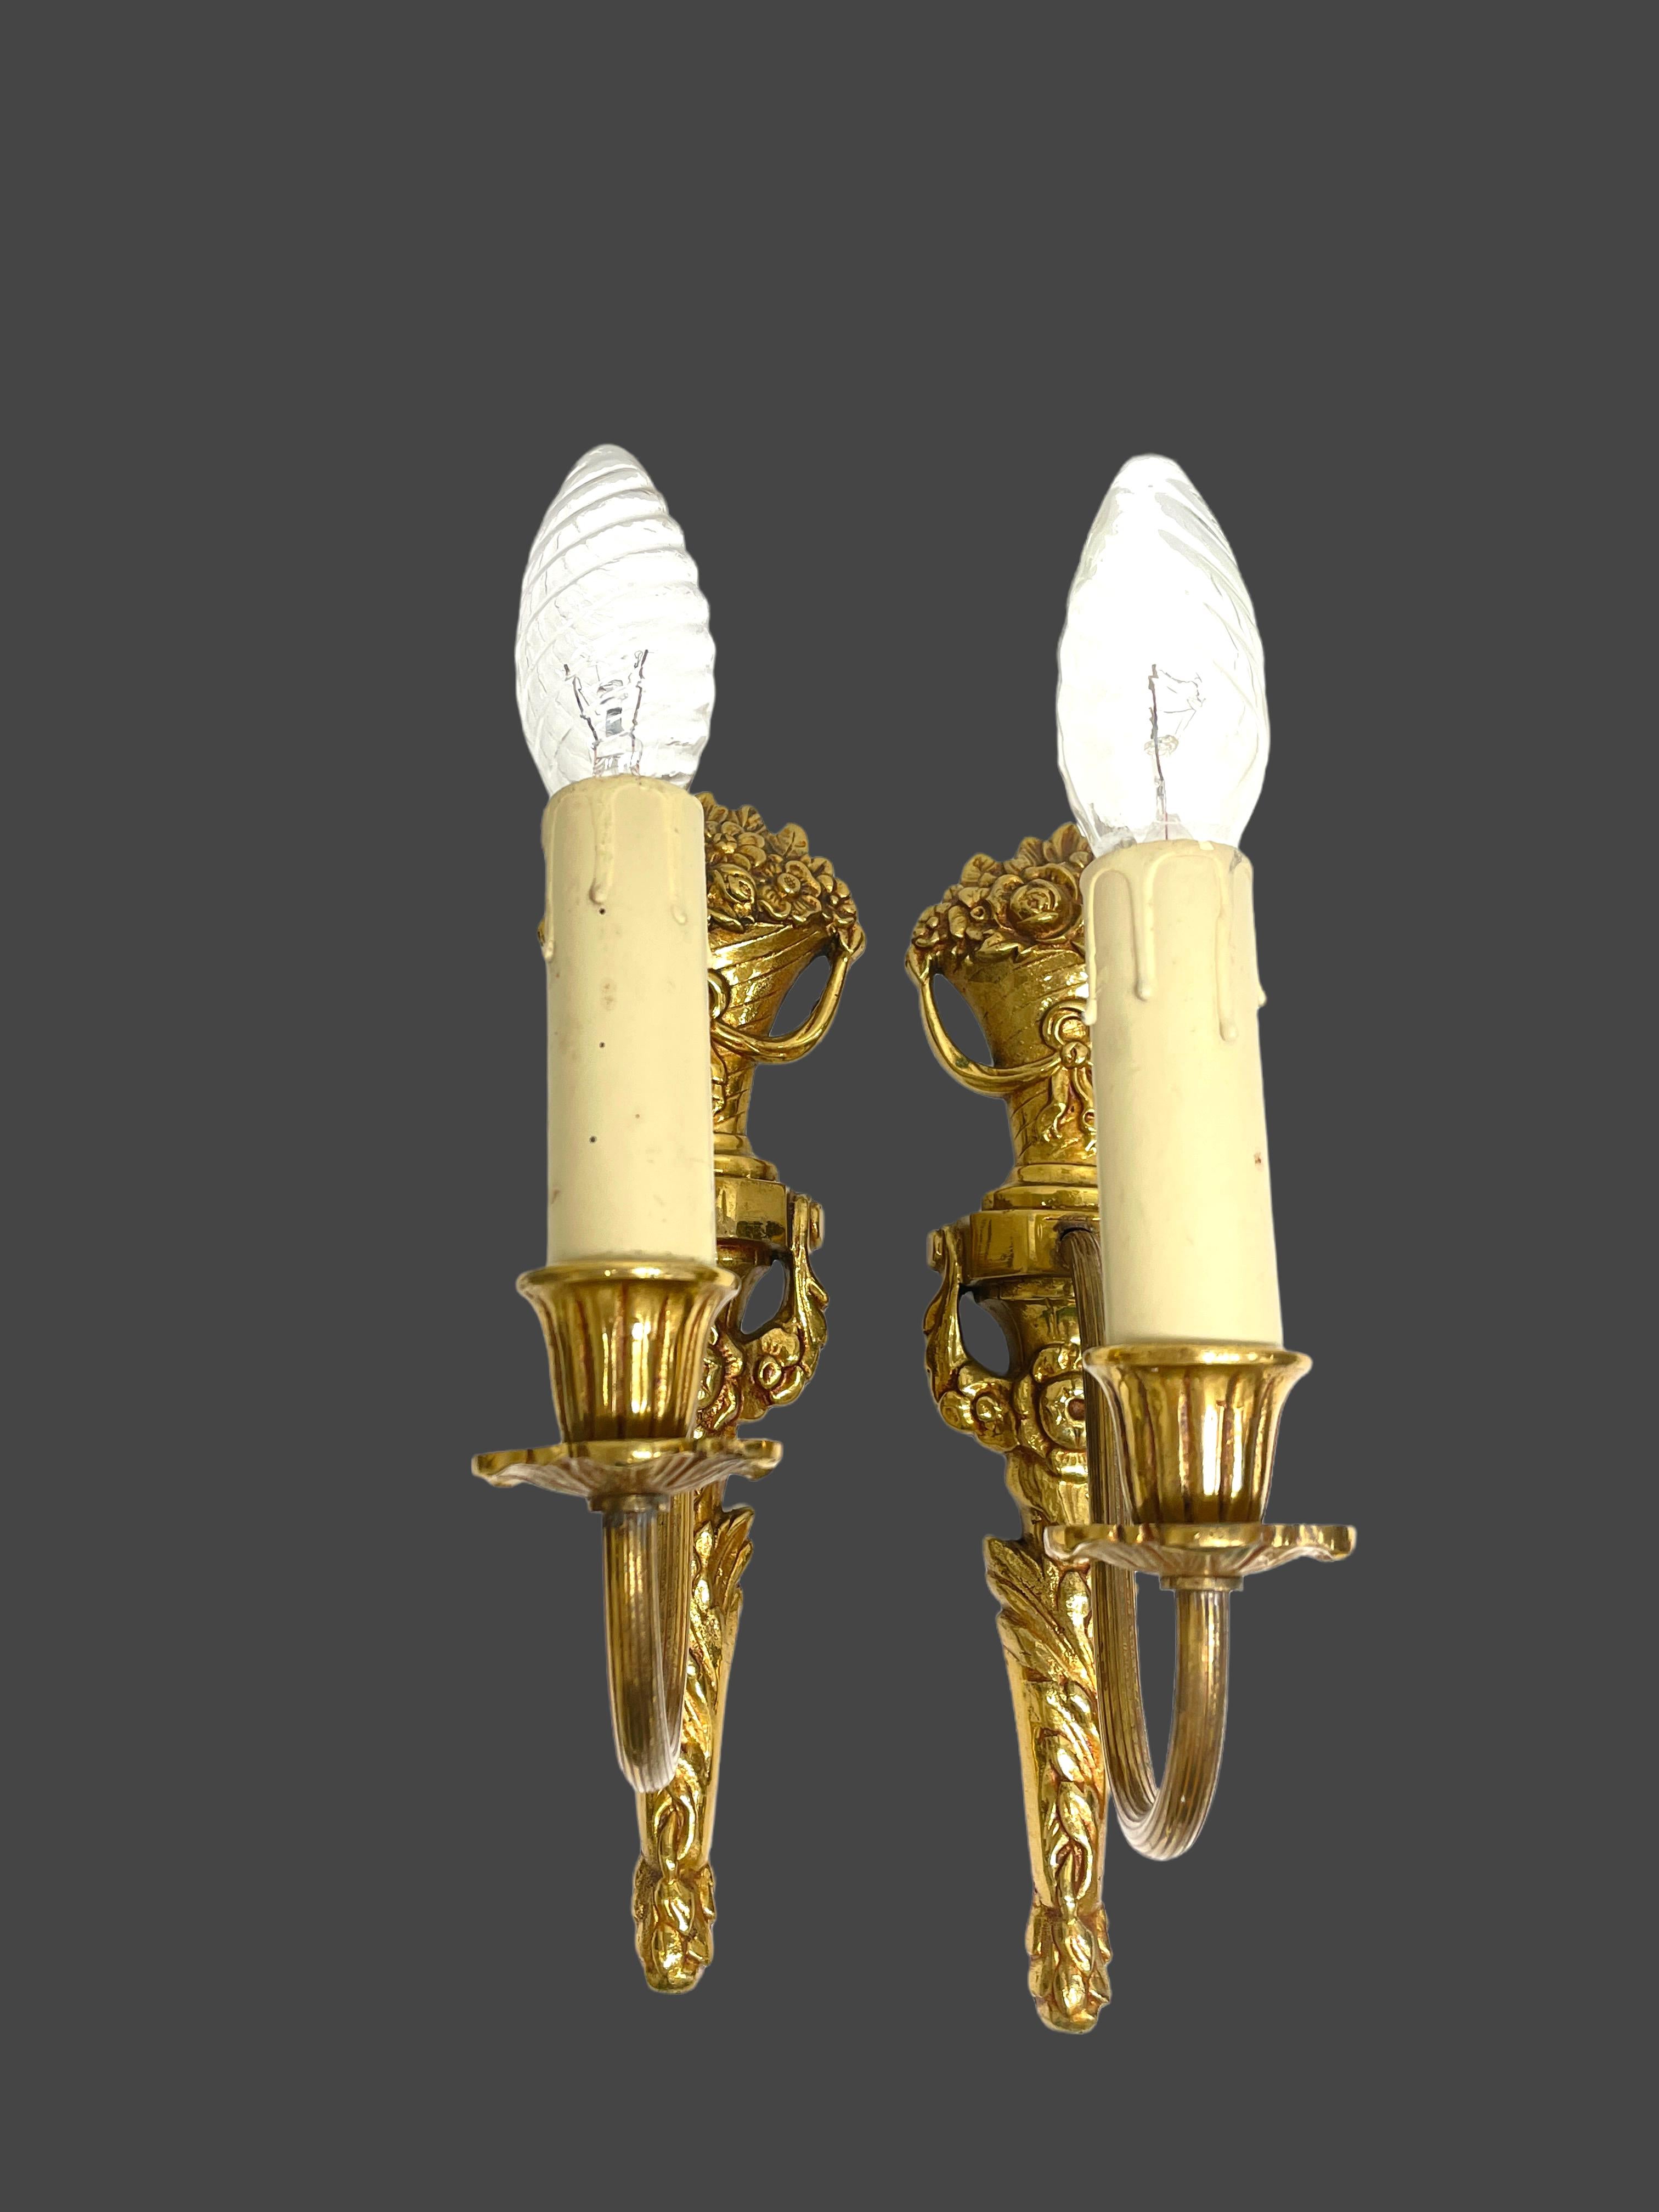 Swedish Pair of Empire Wall Sconces in Bronze with Flower Basket Motif, Sweden, 1950s For Sale